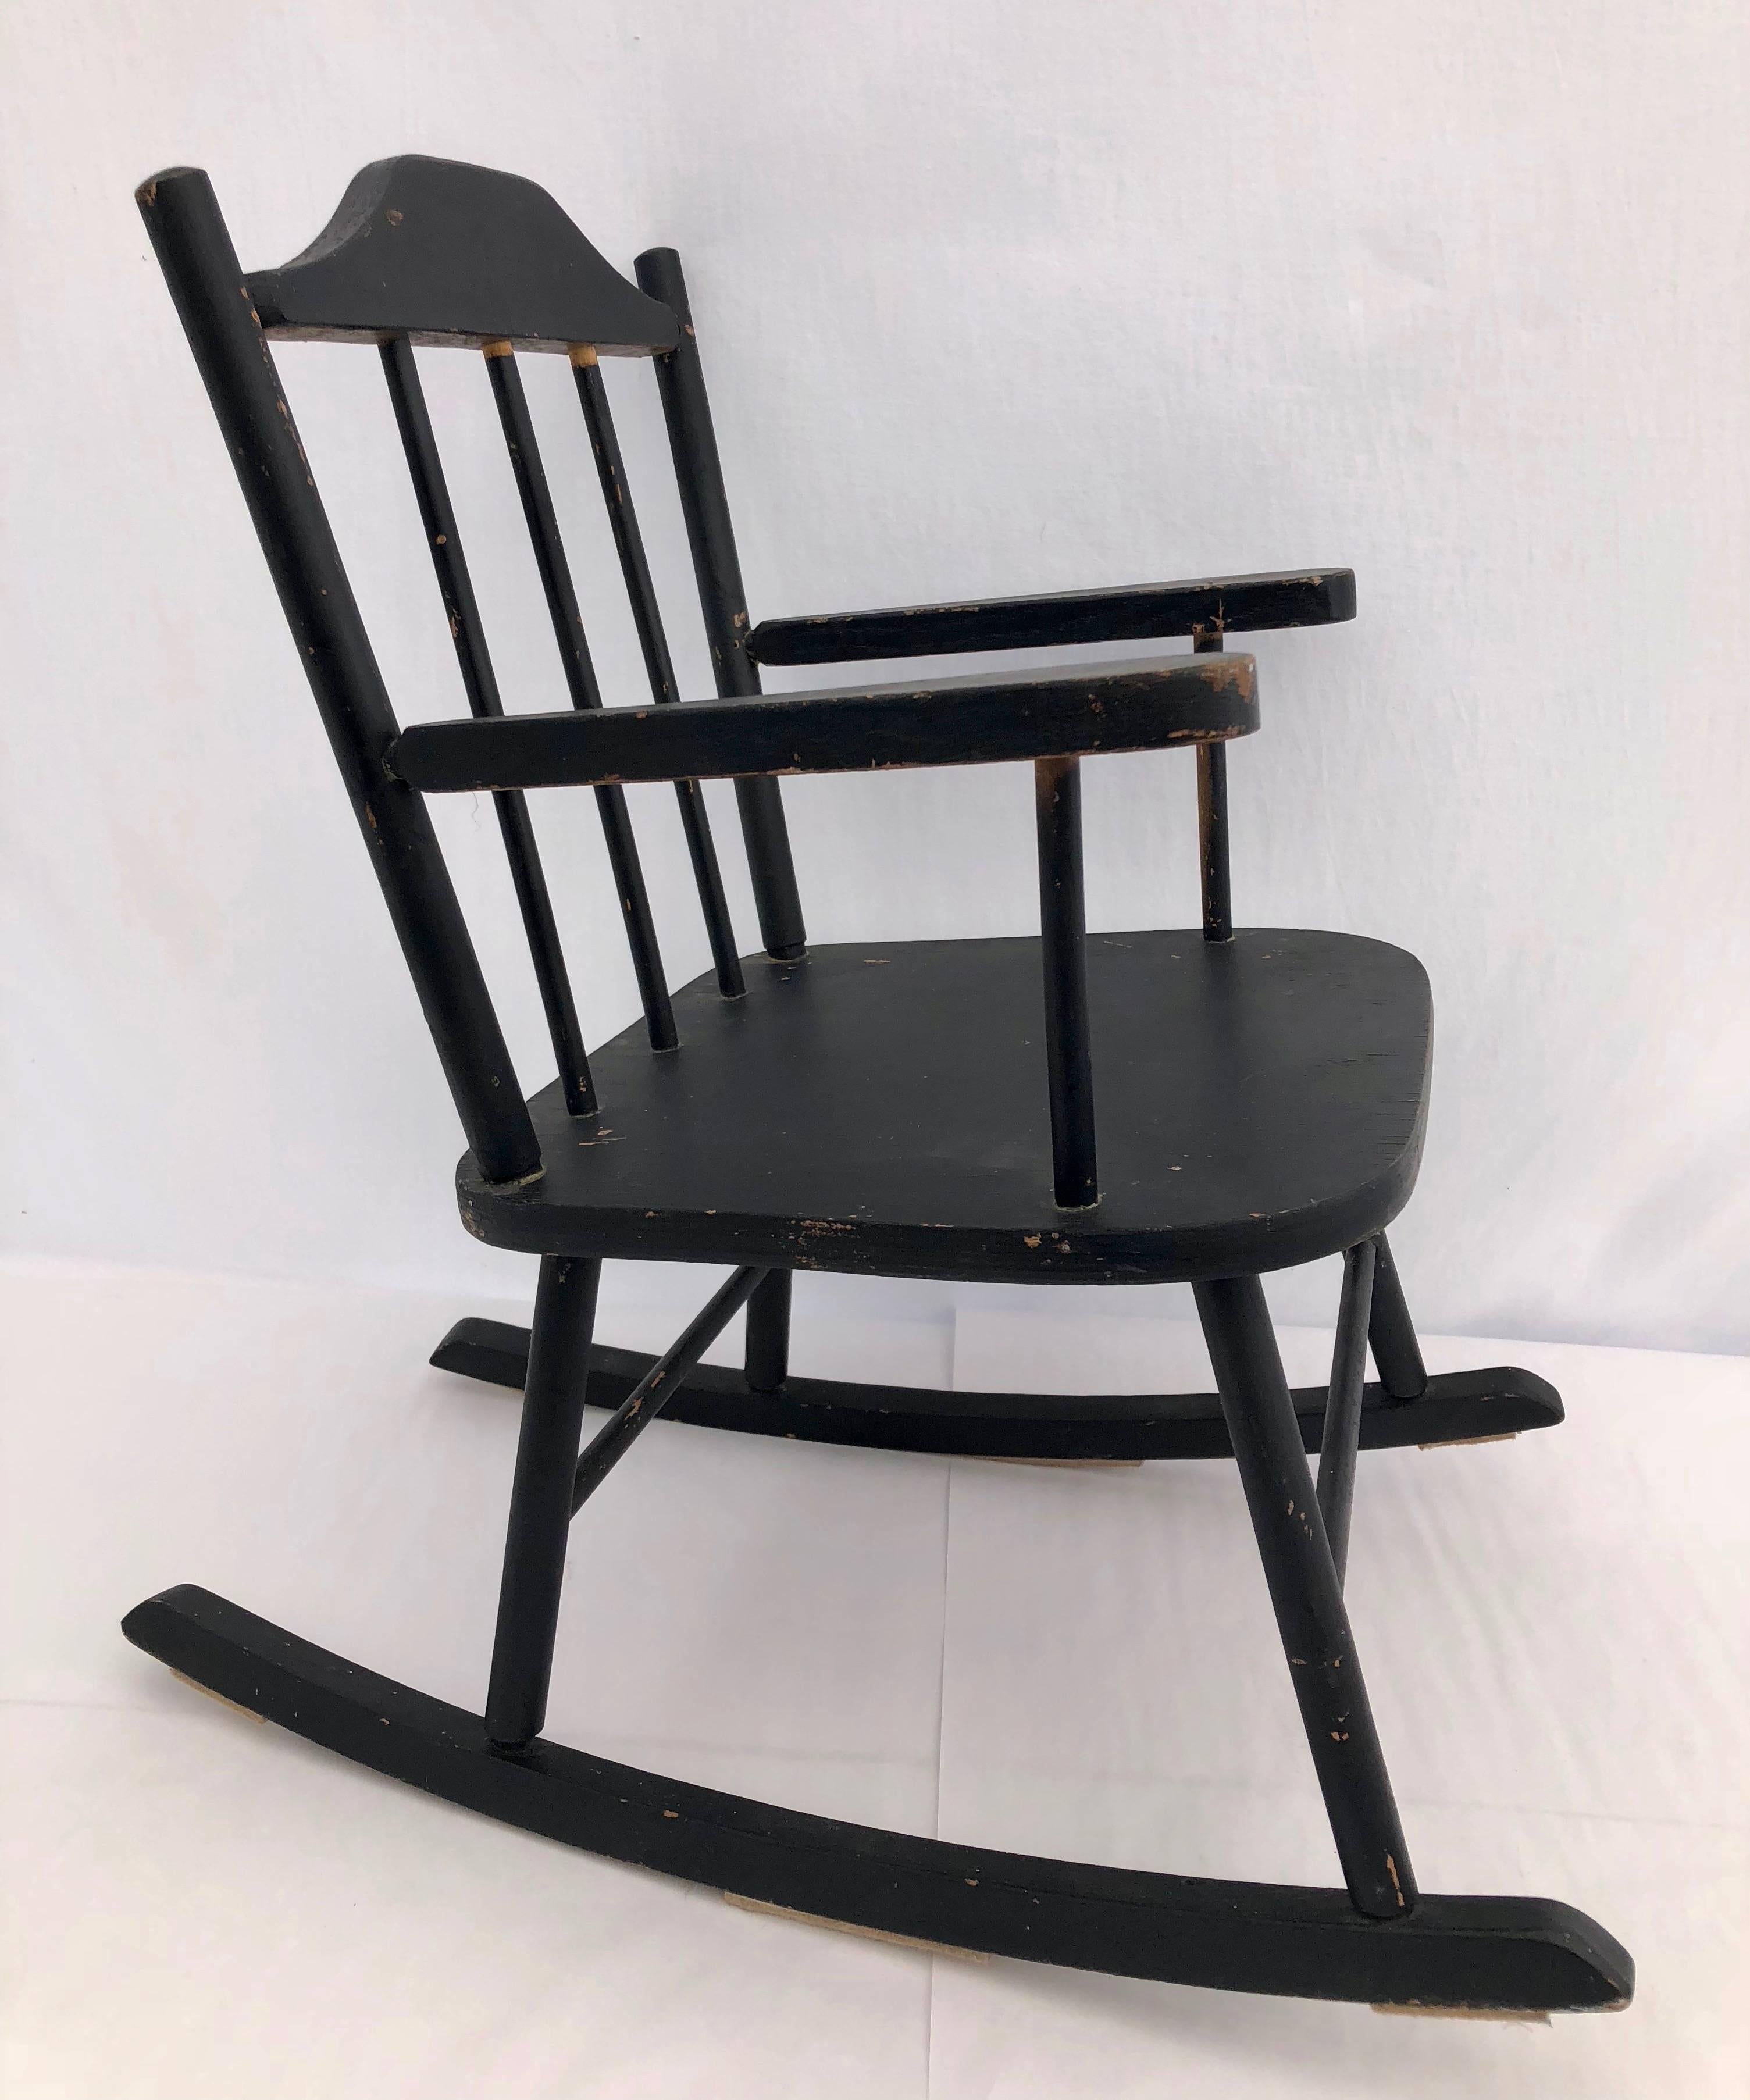 Wooden Child's Rocking Chair with Spindle Back, Painted Black In Good Condition For Sale In Petaluma, CA